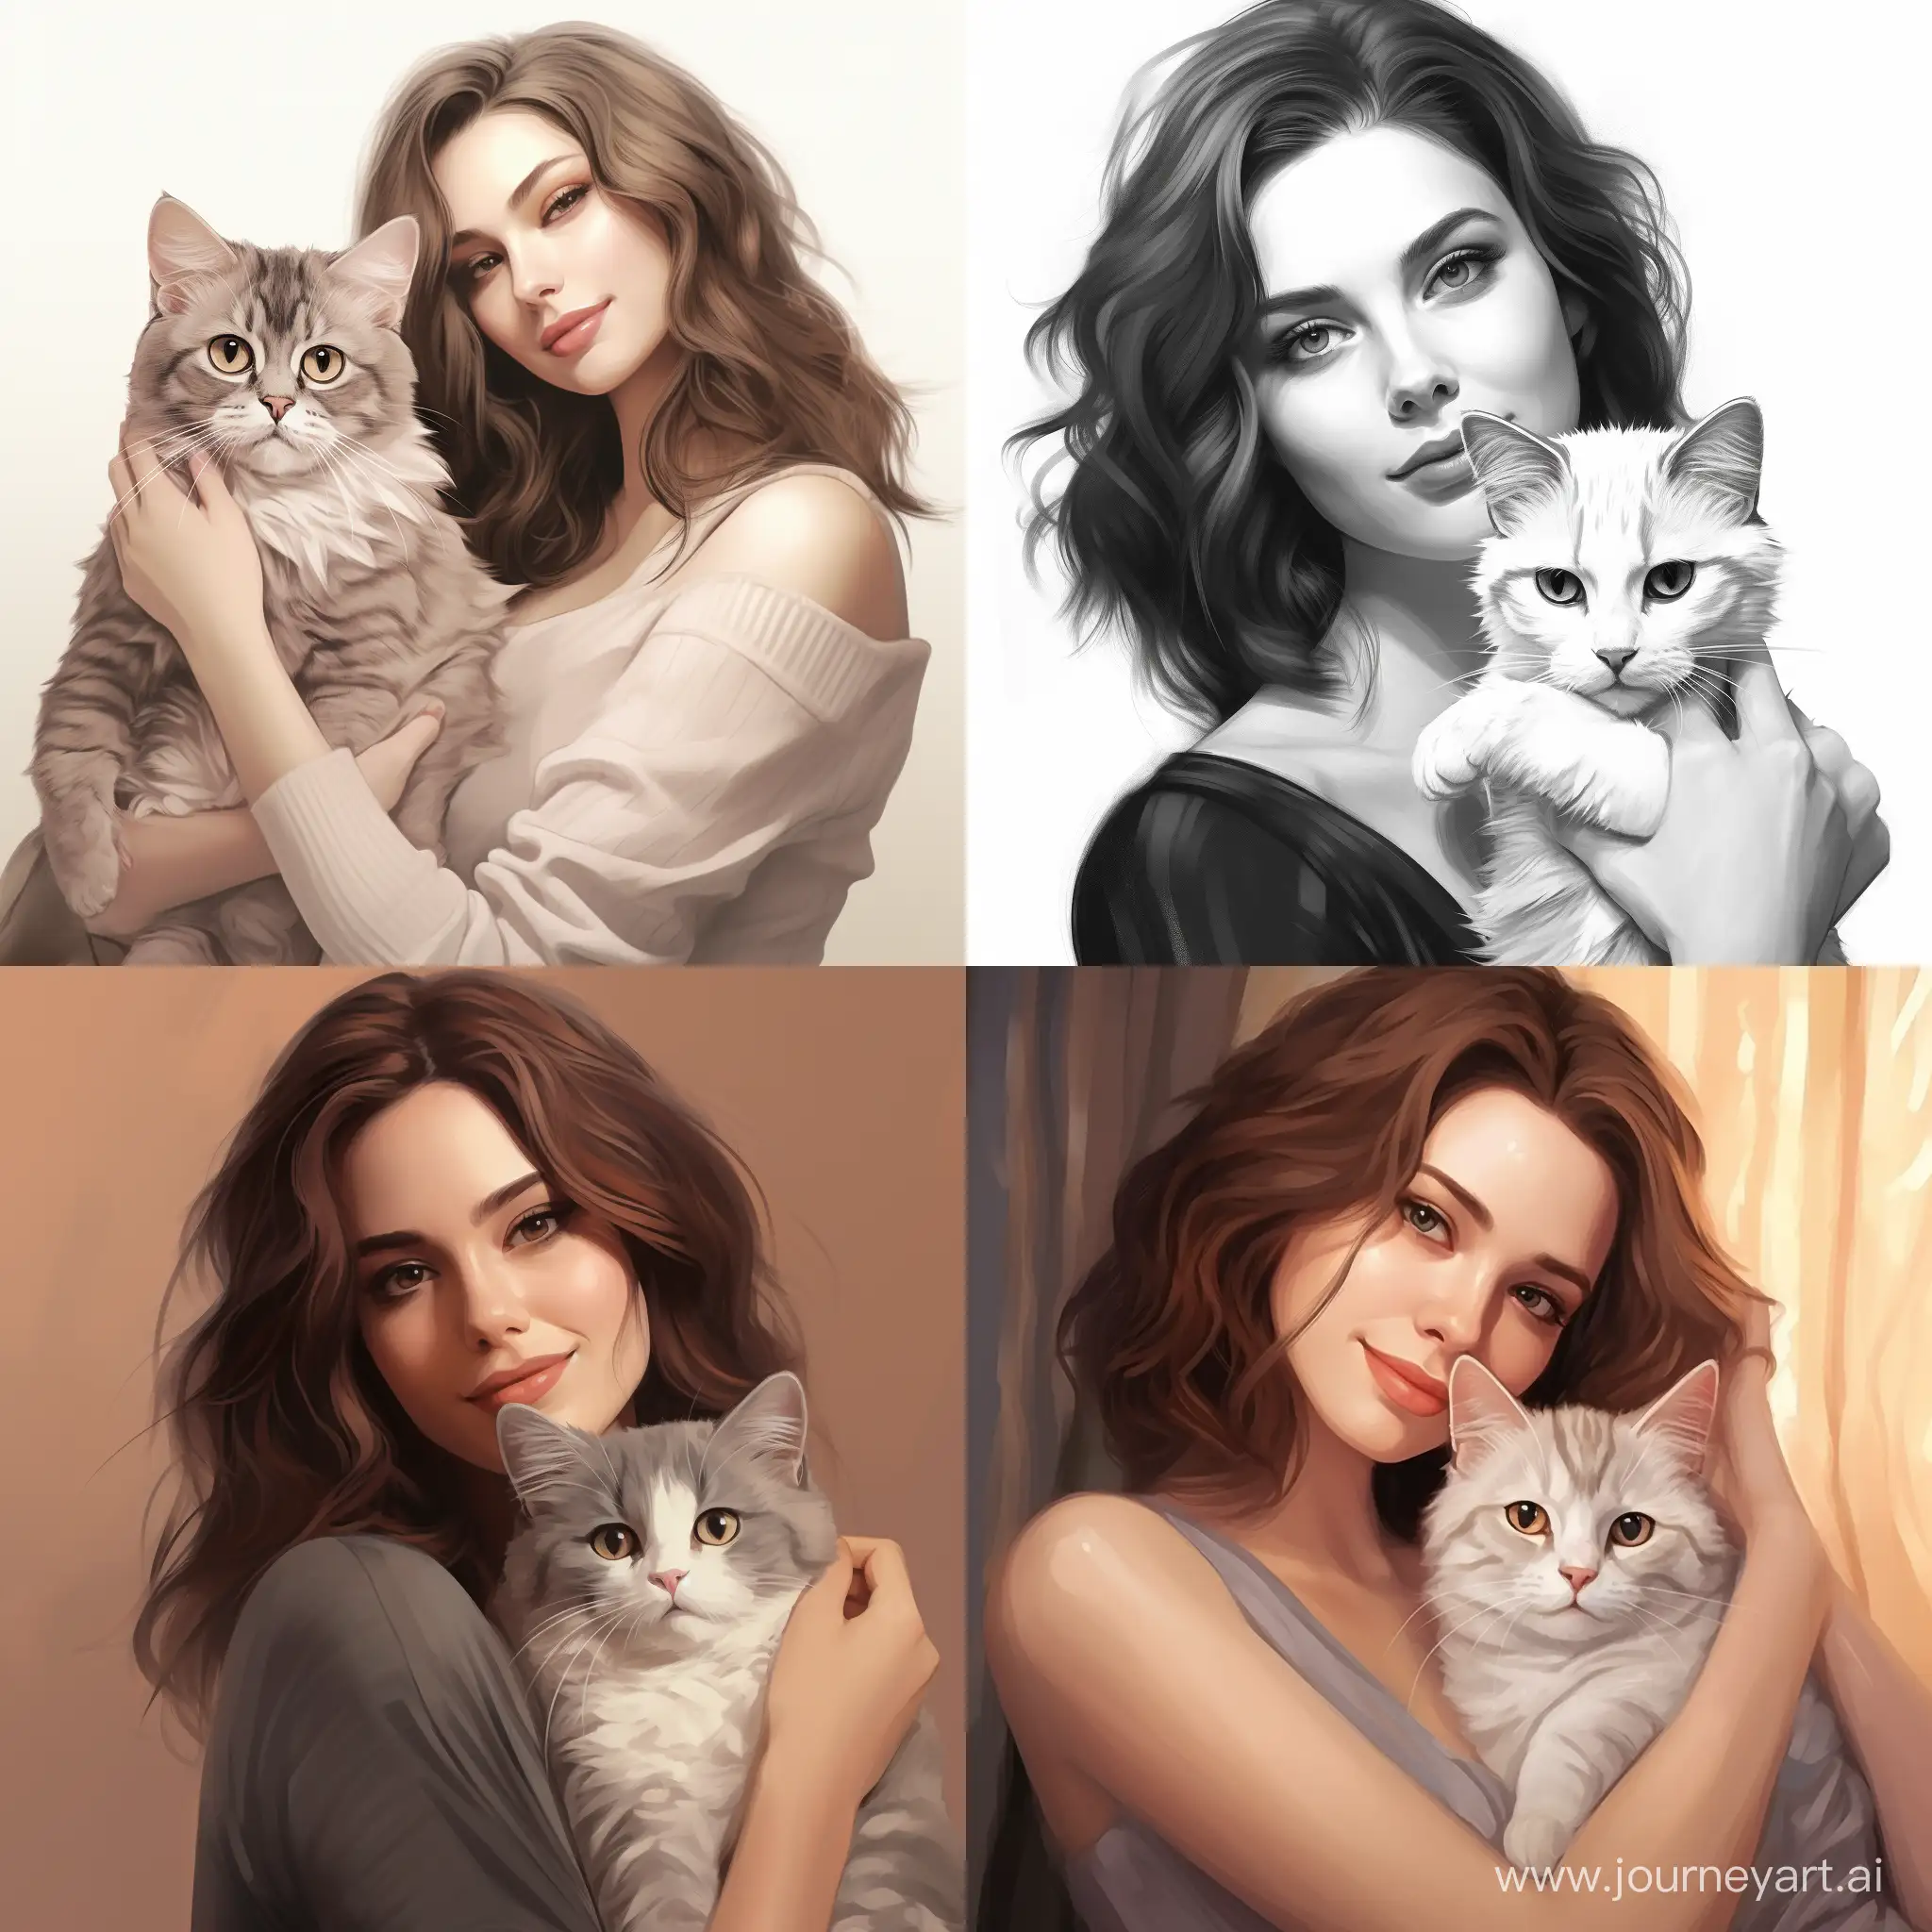  Draw a beautiful woman holding an American shorthair cat